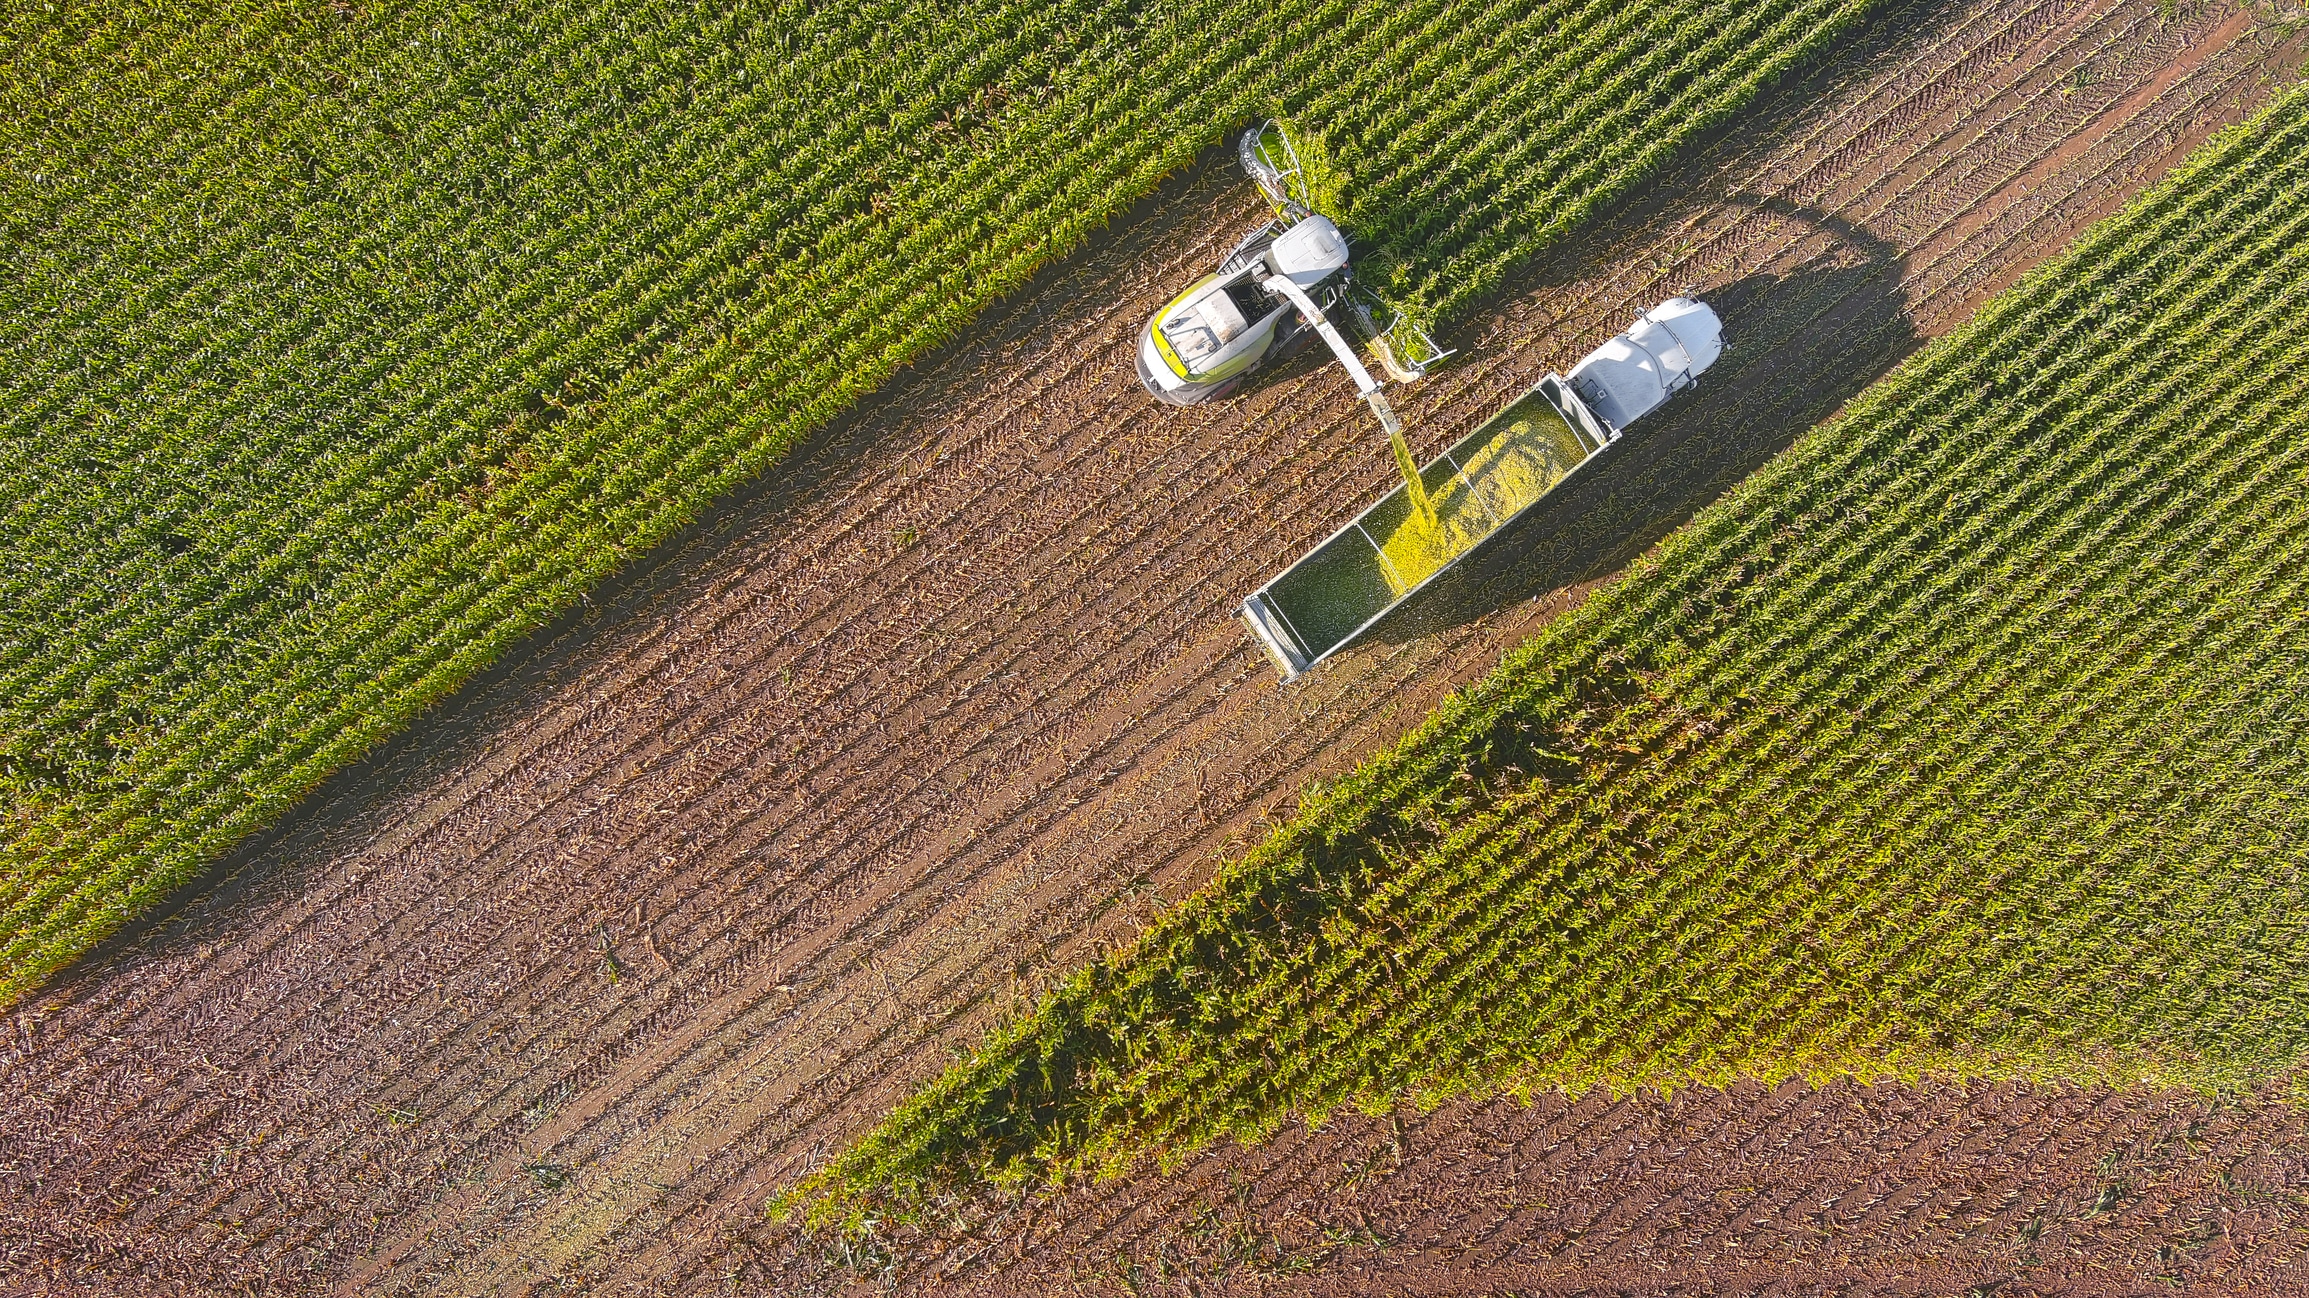 Farm machines, combine and semi-truck harvesting corn, entire plant is used, aerial view.